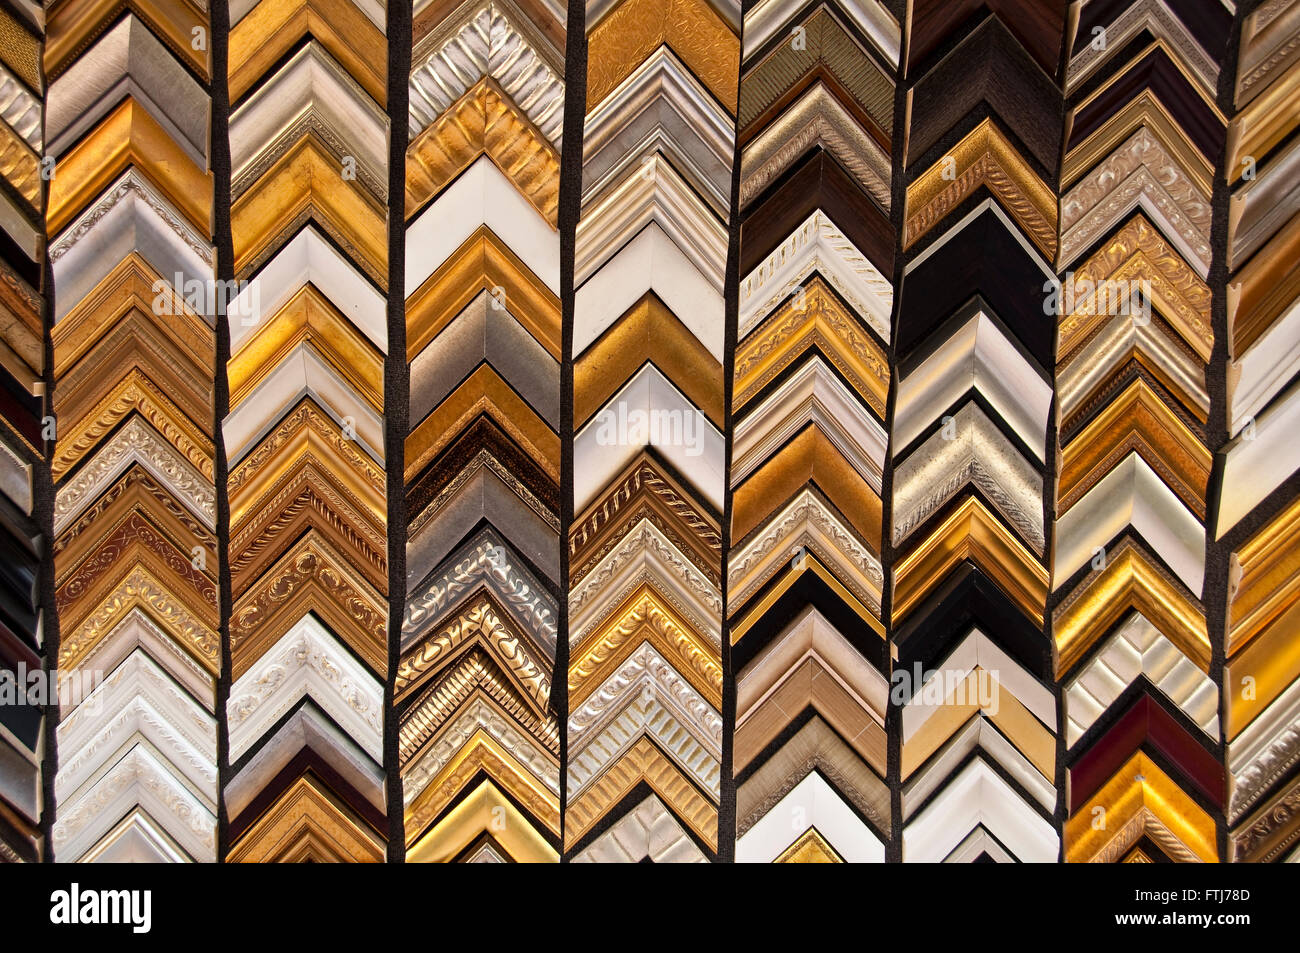 Collection of wood frame samples Stock Photo